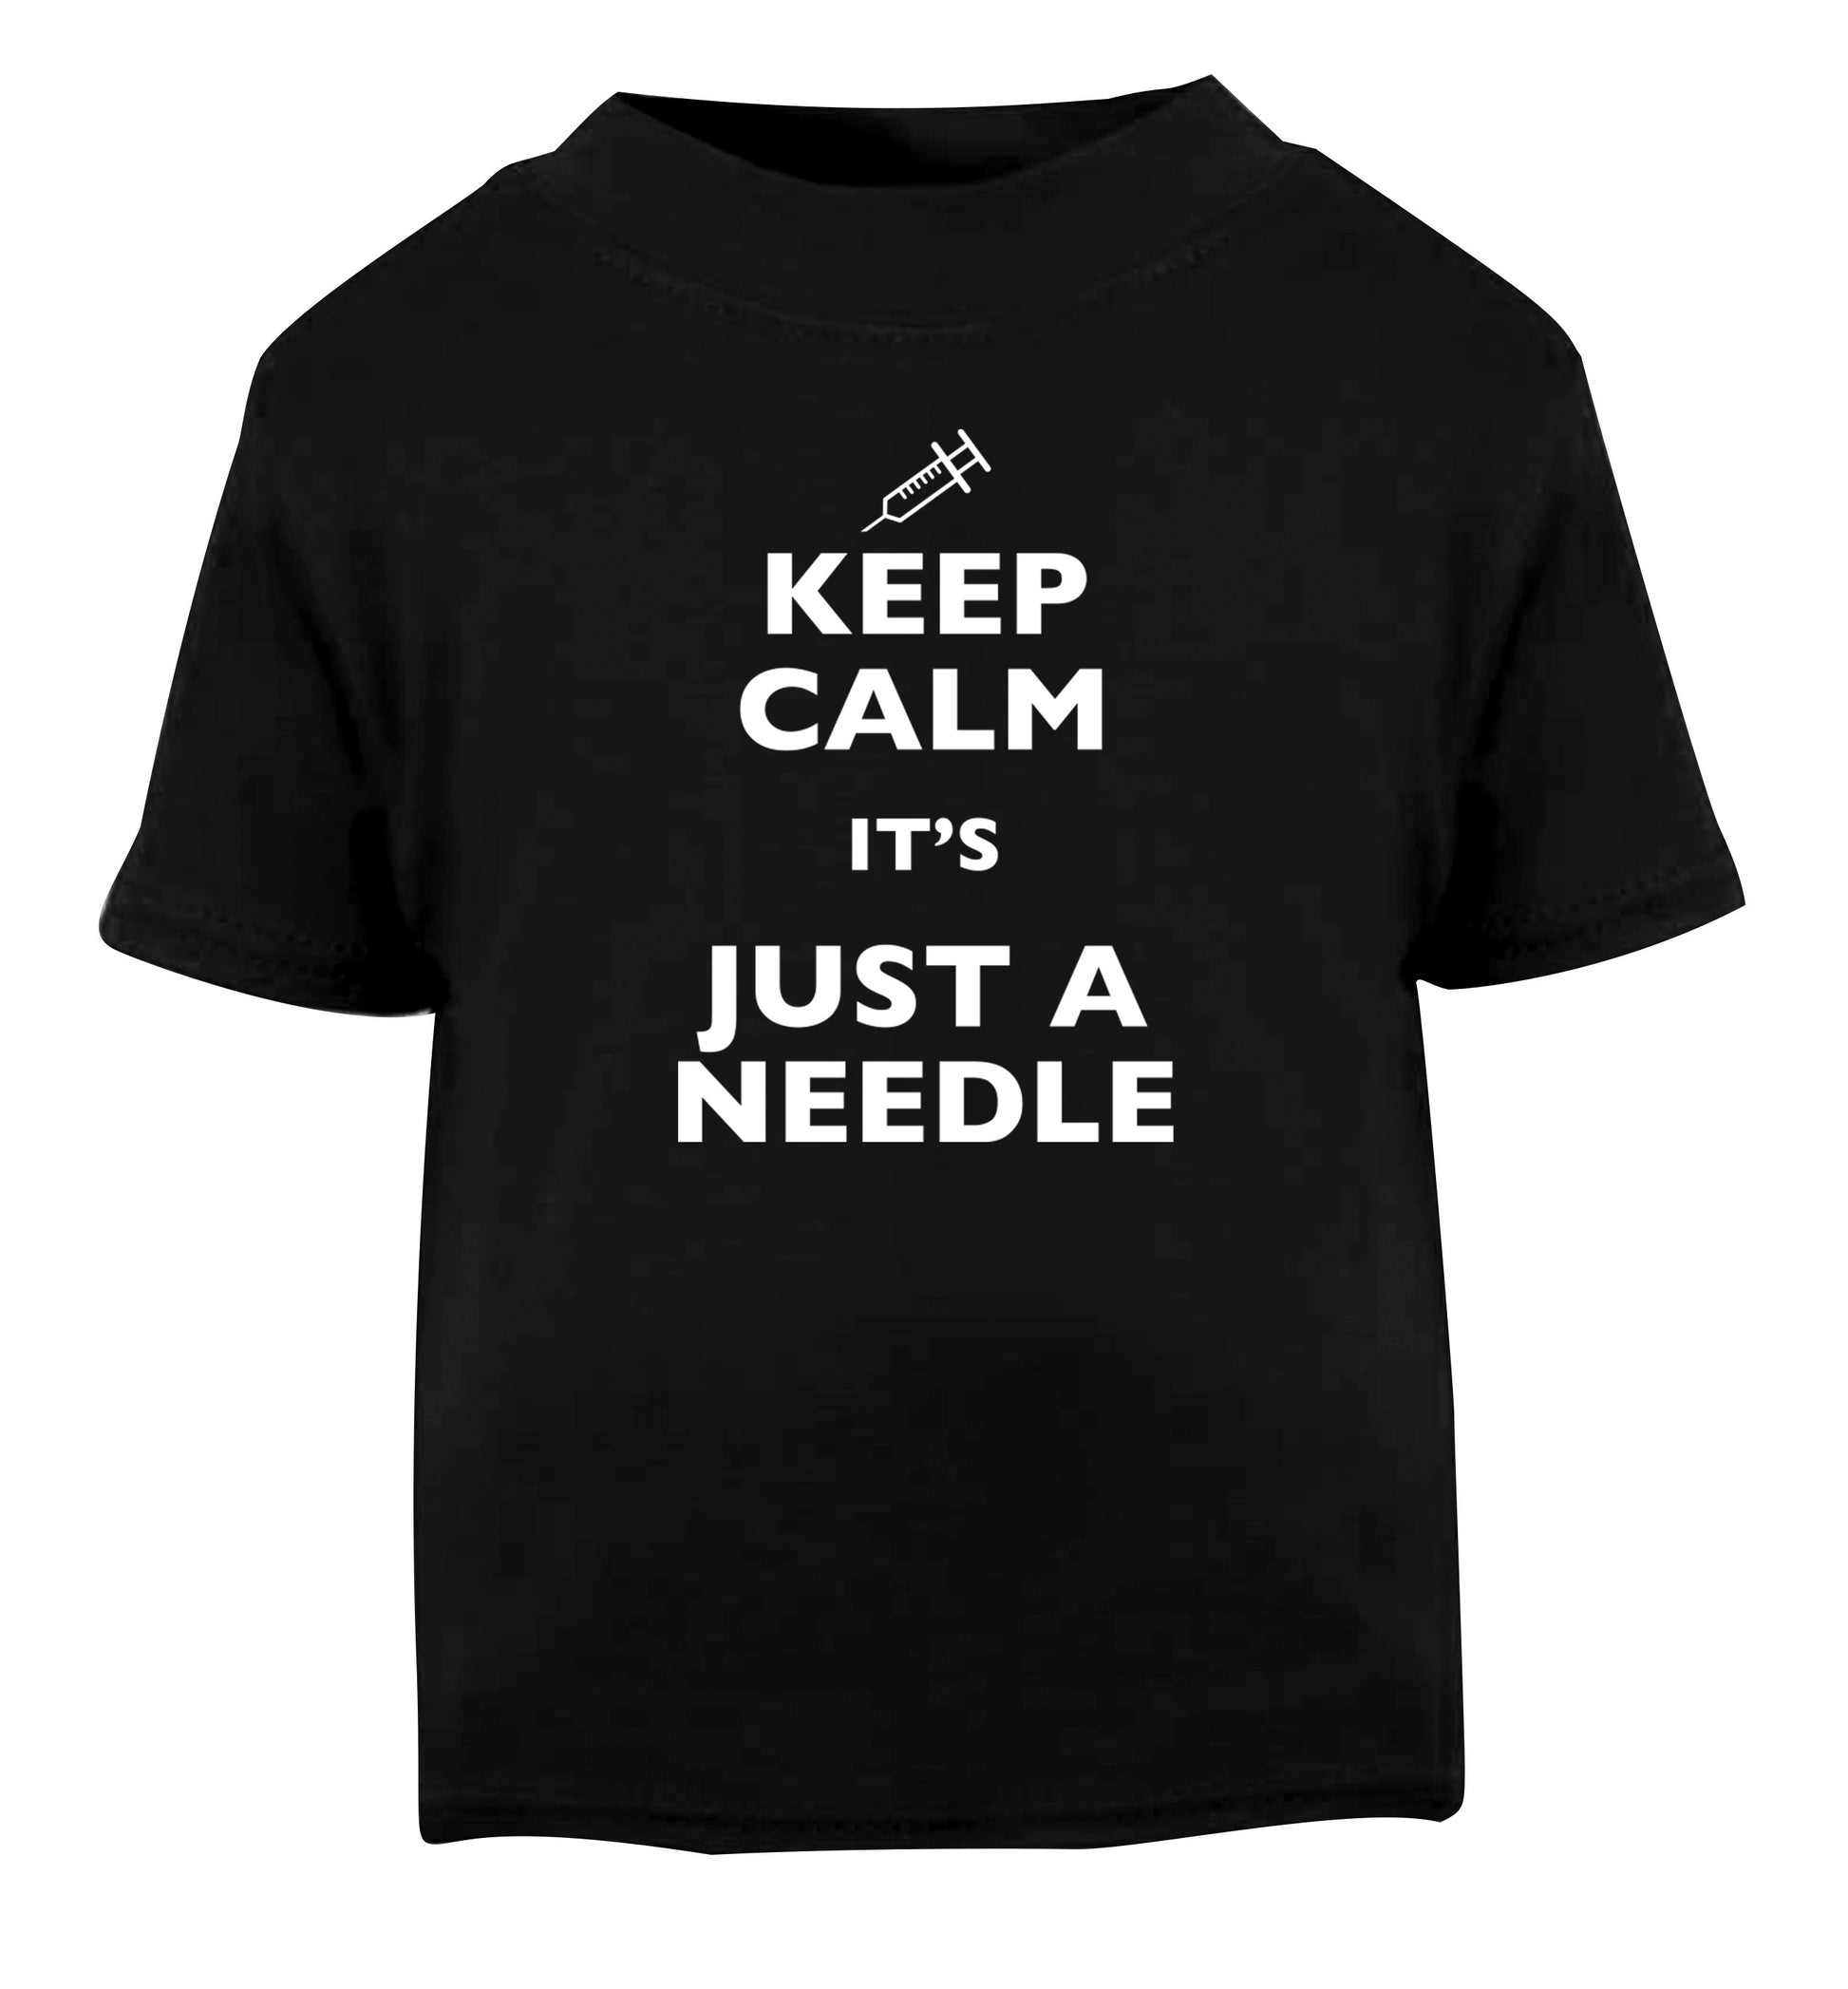 Keep calm it's only a needle Black Baby Toddler Tshirt 2 years